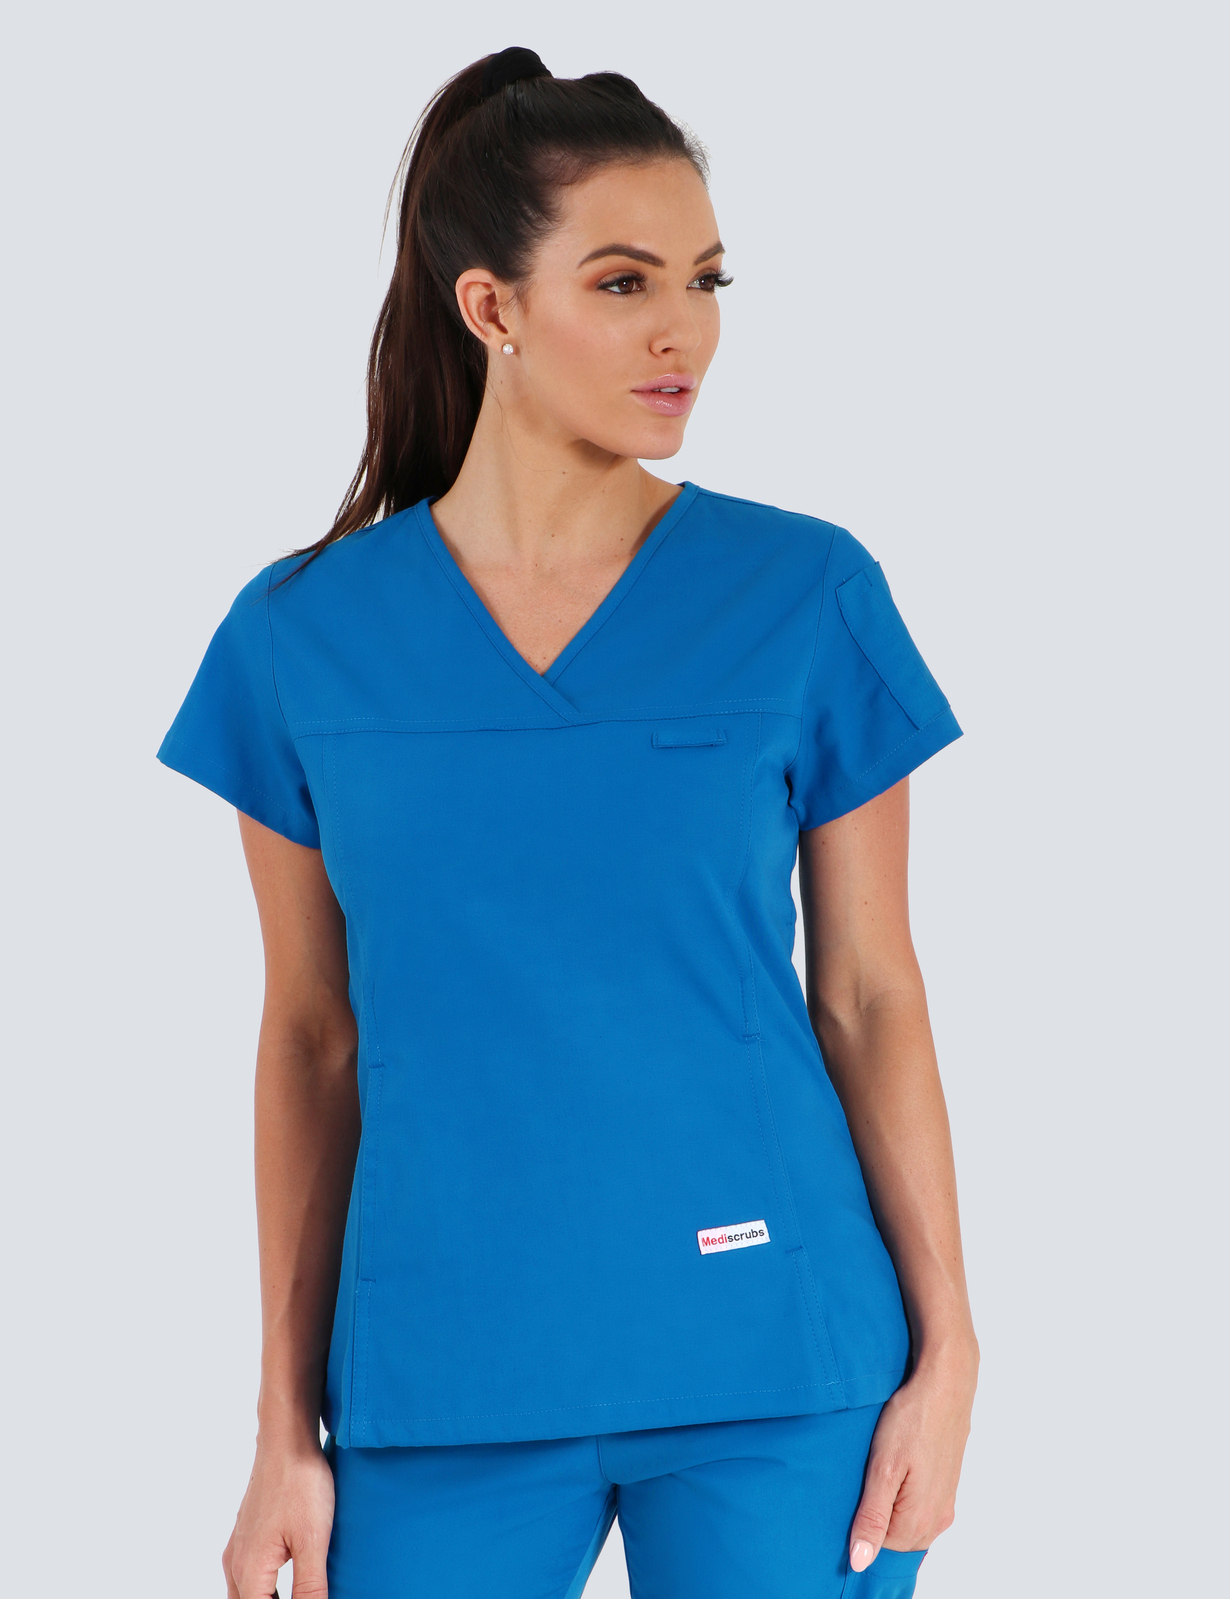 Canberra Hospital - Cardiology Cardiac Physiologist (Women's Fit Solid Scrub Top in Royal incl Logos)